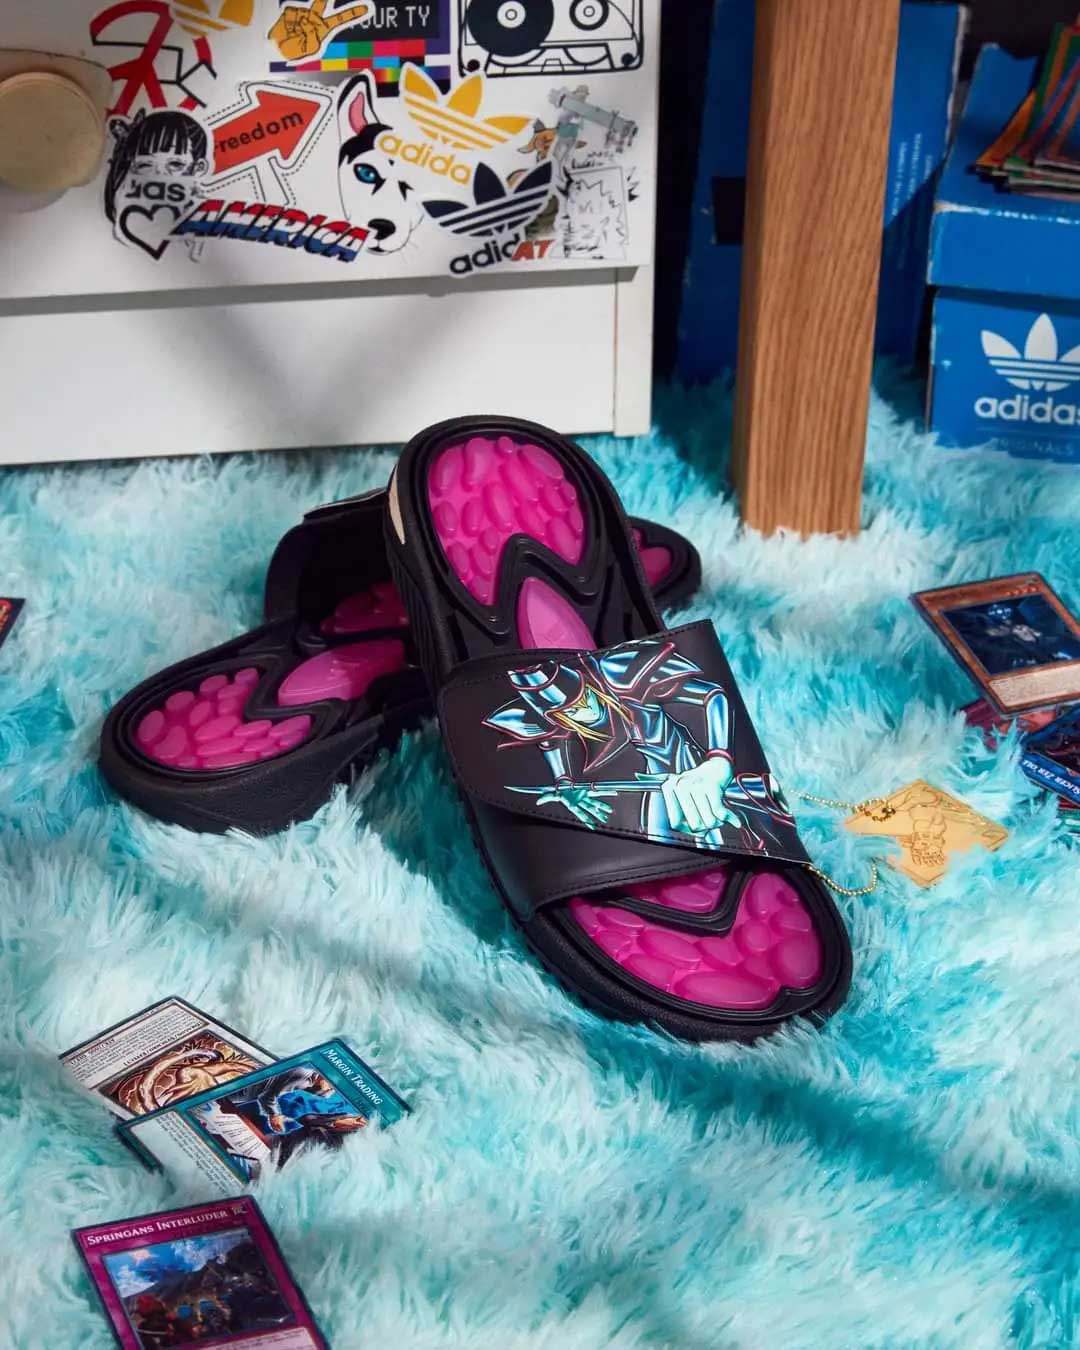 yu-gi-oh-adidas-sneakers-release-date-price-(14)